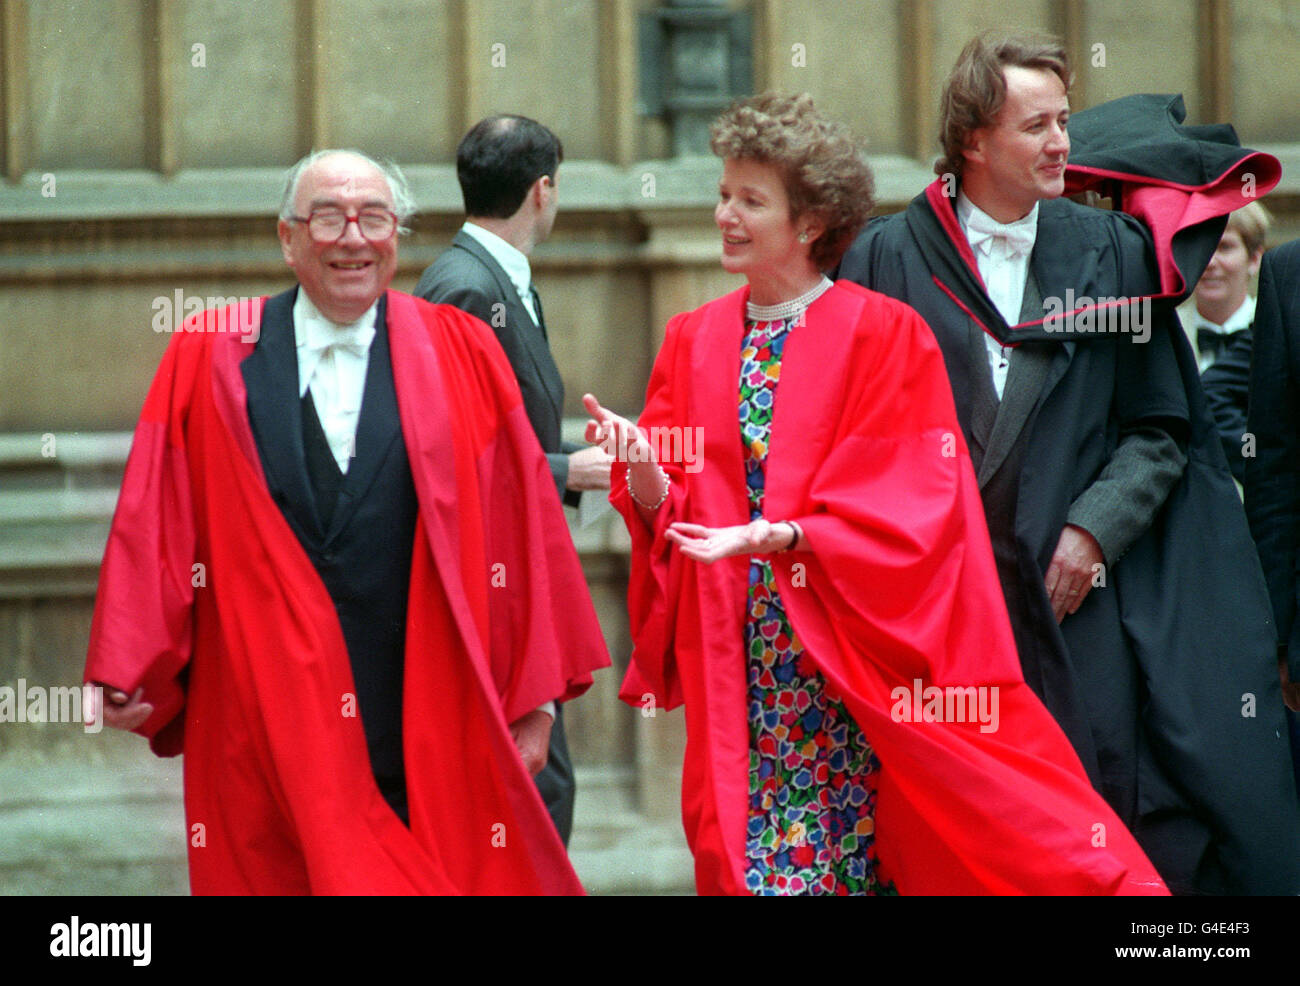 PA NEWS PHOTO 26/5/93 MARY ROBINSON, PRESIDENT OF IRELAND WITH LORD JENKINS OF HILLHEAD, CHANCELLOR OF OXFORD UNIVERSITY AND ROY FOSTER, THE CARROLL PROFESSOR OF IRISH HISTORY (RIGHT) LEAVING THE BODLEIAN LIBRARY AFTER SHE RECEIVED THE DEGREE OF DOCTOR OF CIVIL LAW BY DIPLOMA IN LONDON Stock Photo